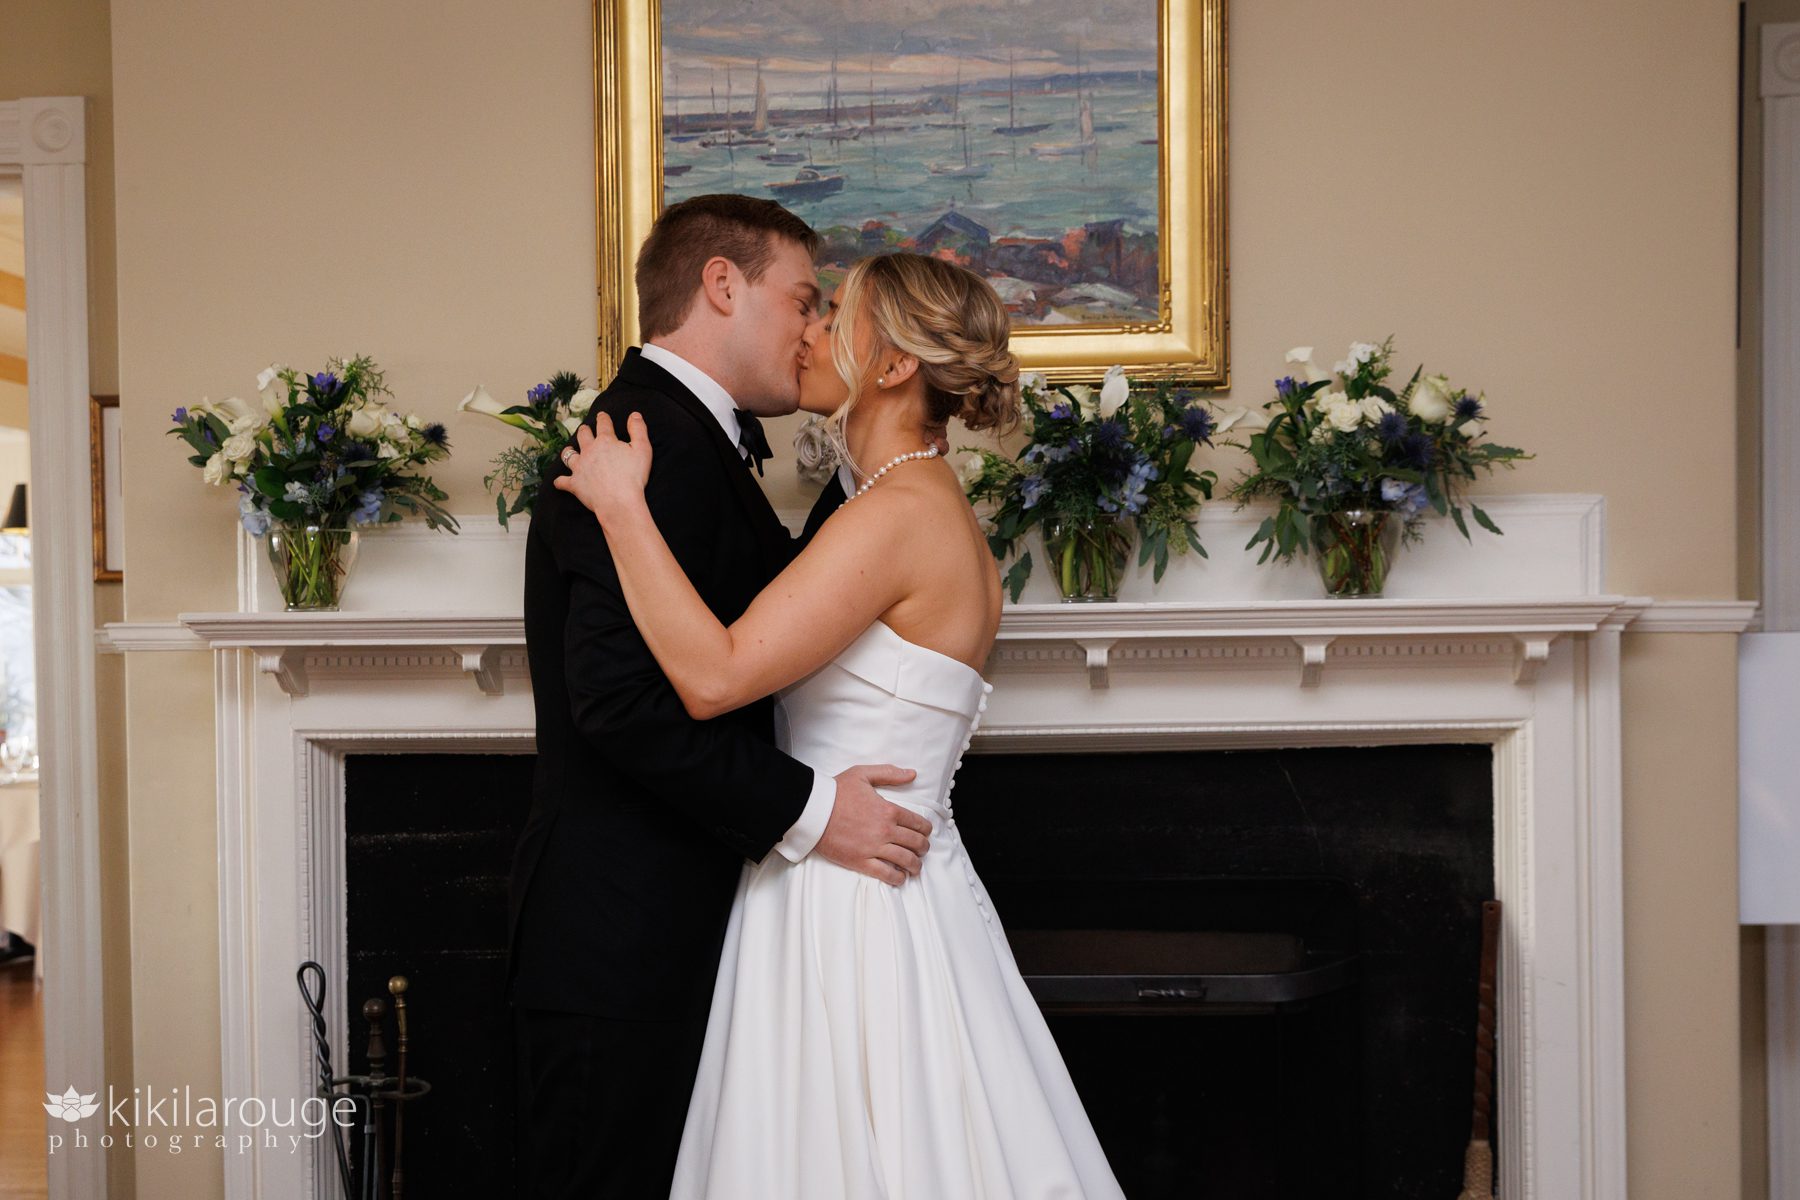 Wedding couples first kiss by fireplace with flowers on mantel